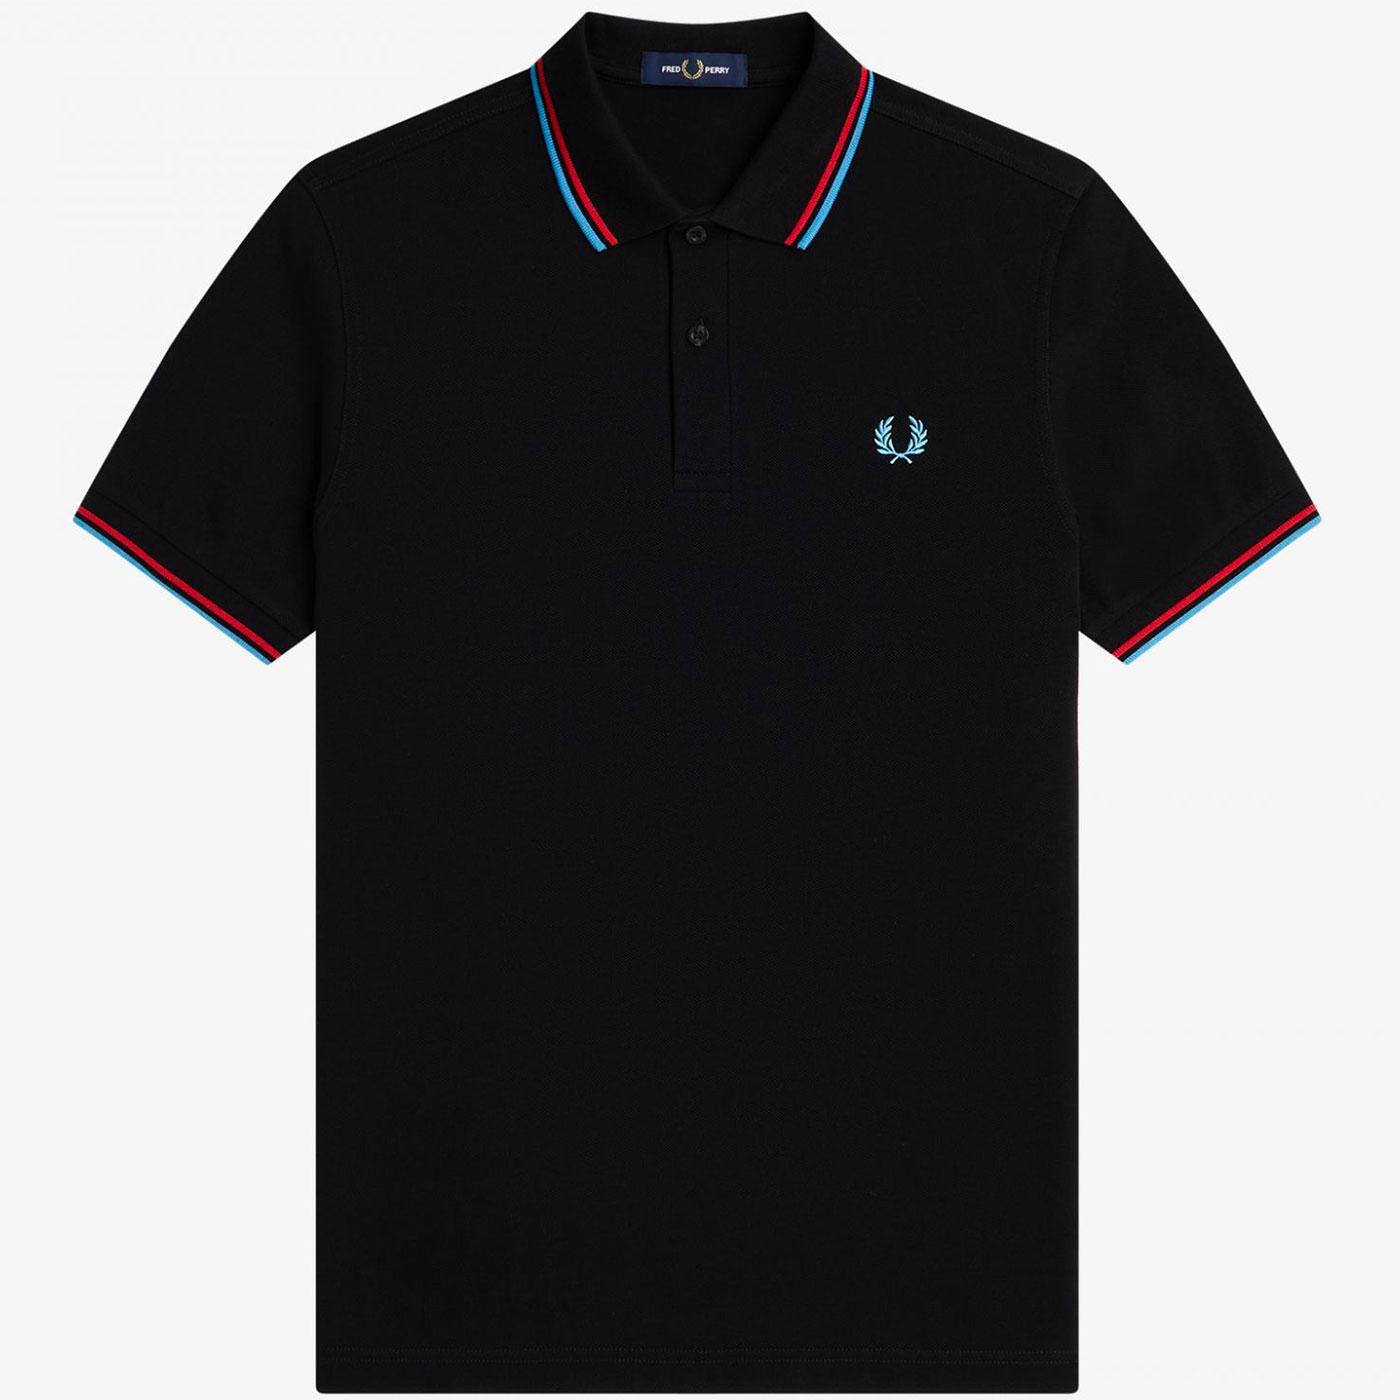 FRED PERRY M3600 Mod Twin Tipped Polo Shirt B/WR/B